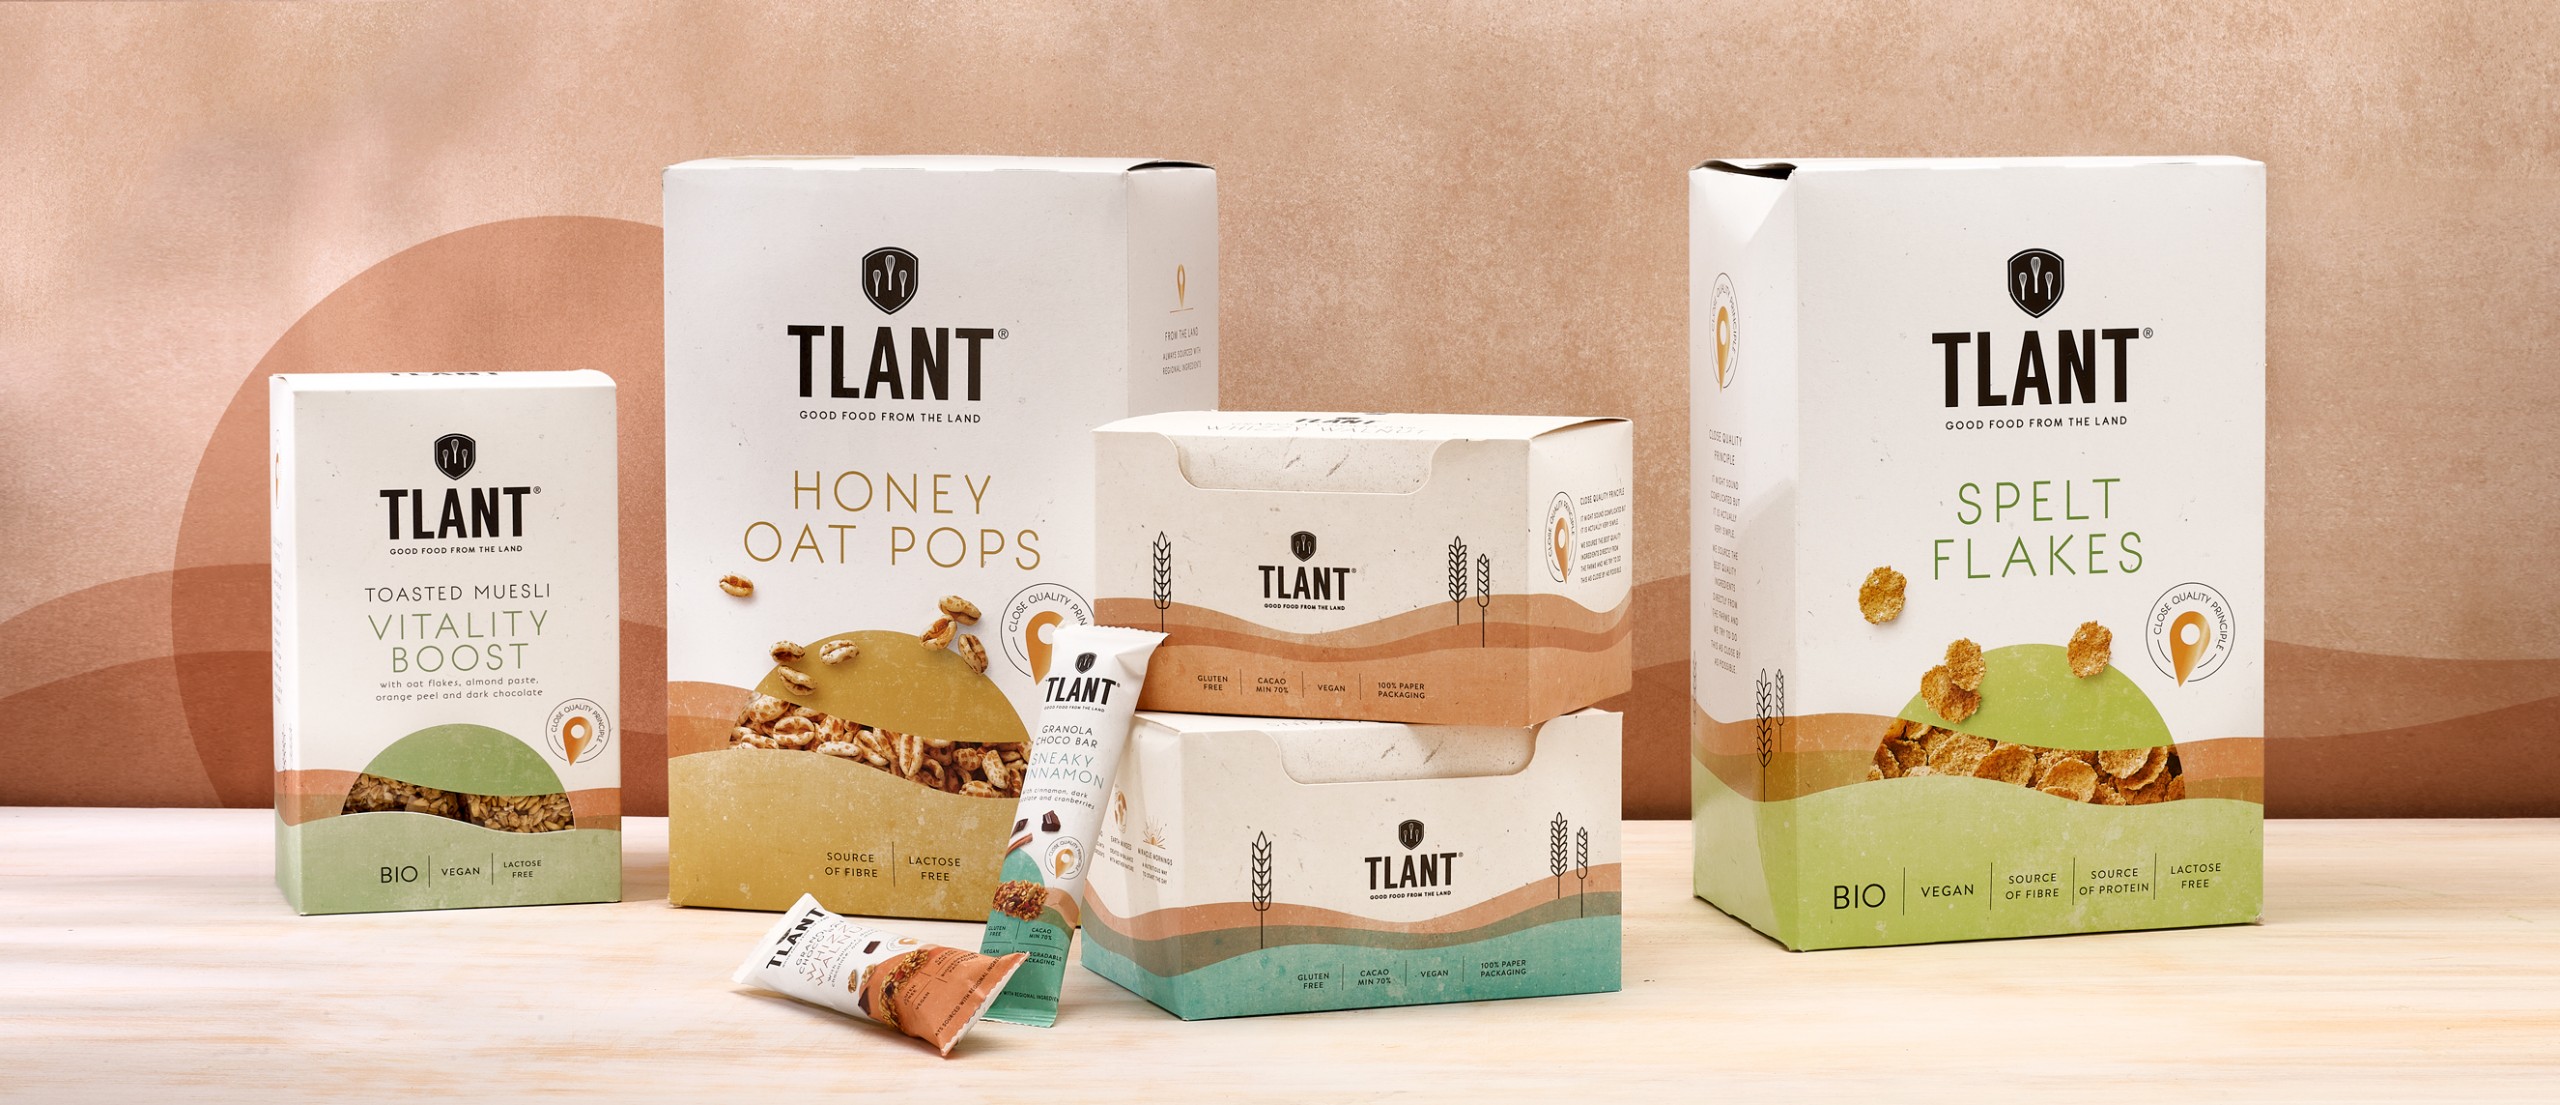 Quatre Mains package design - Package design Brand and packaging redesign for TLANT